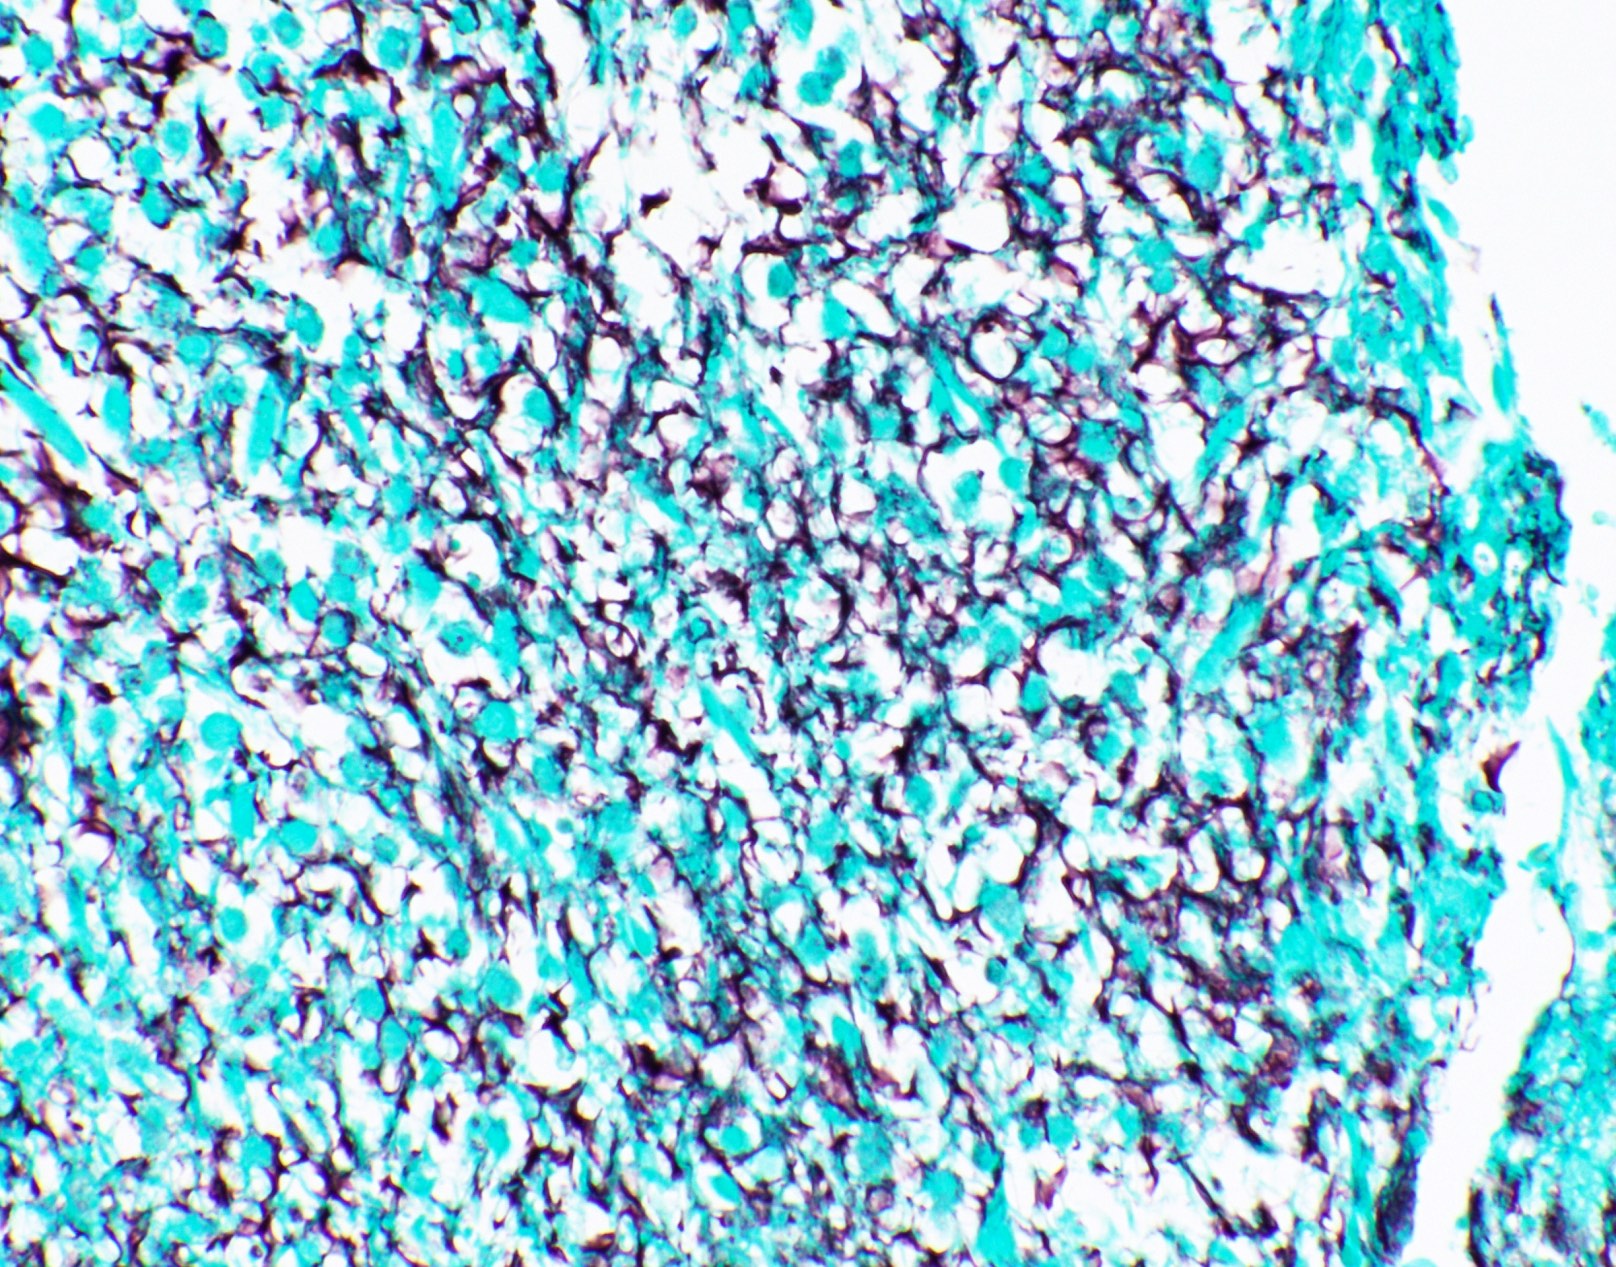 Thick extracellular mucin